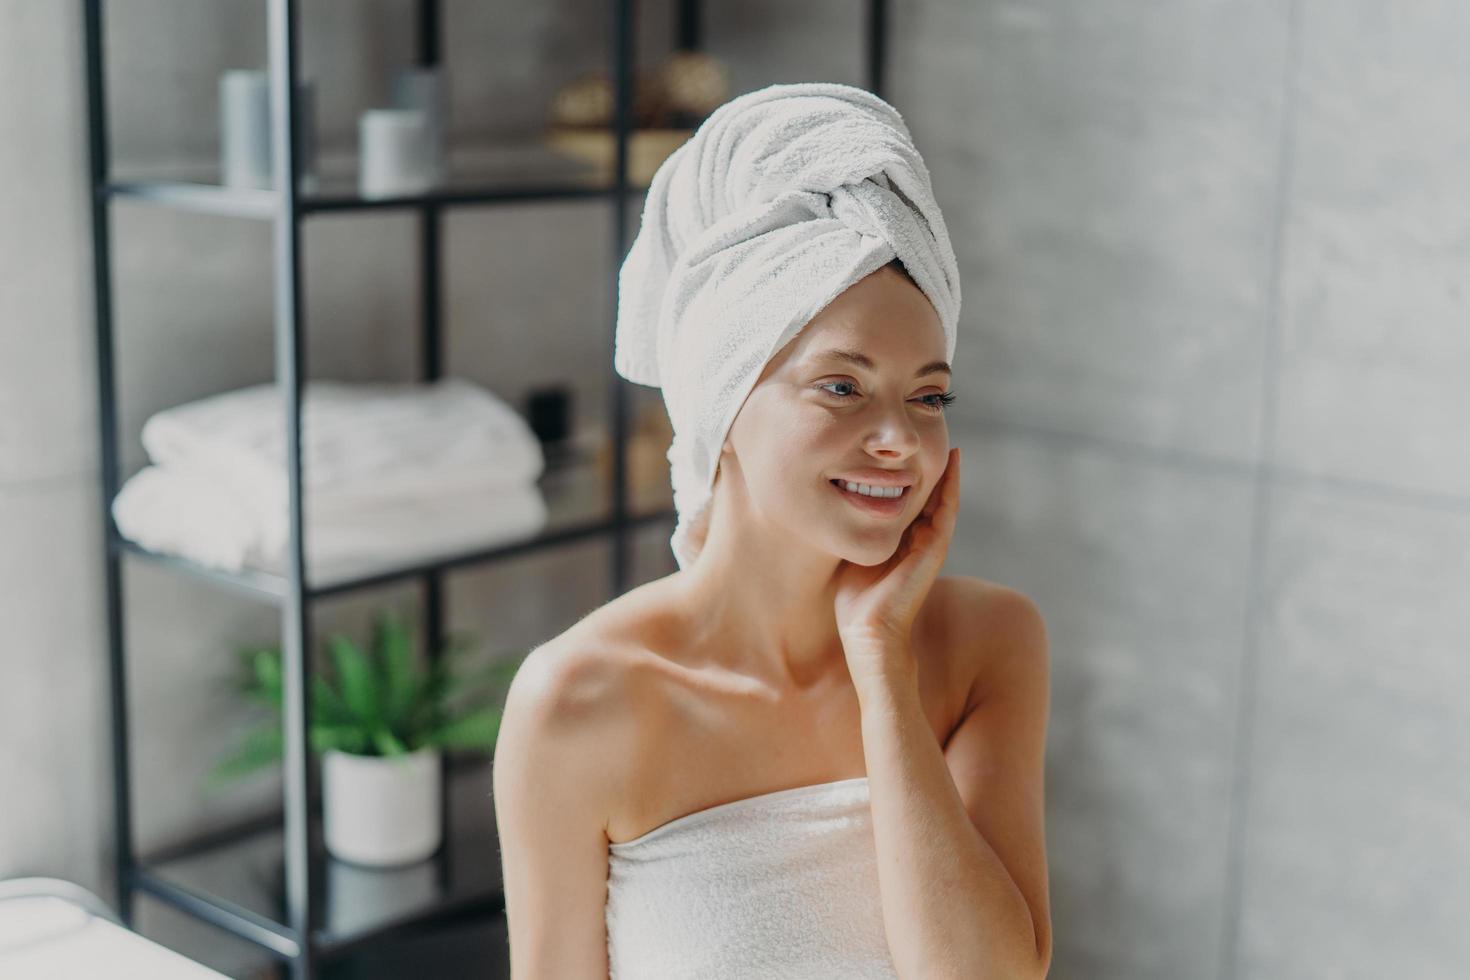 Positive European woman smiles pleasantly, touches healthy skin, wears wrapped towel on head, poses in bathroom. Spa lady with natural makeup poses refreshed after taking shower. Pampering, wellness photo